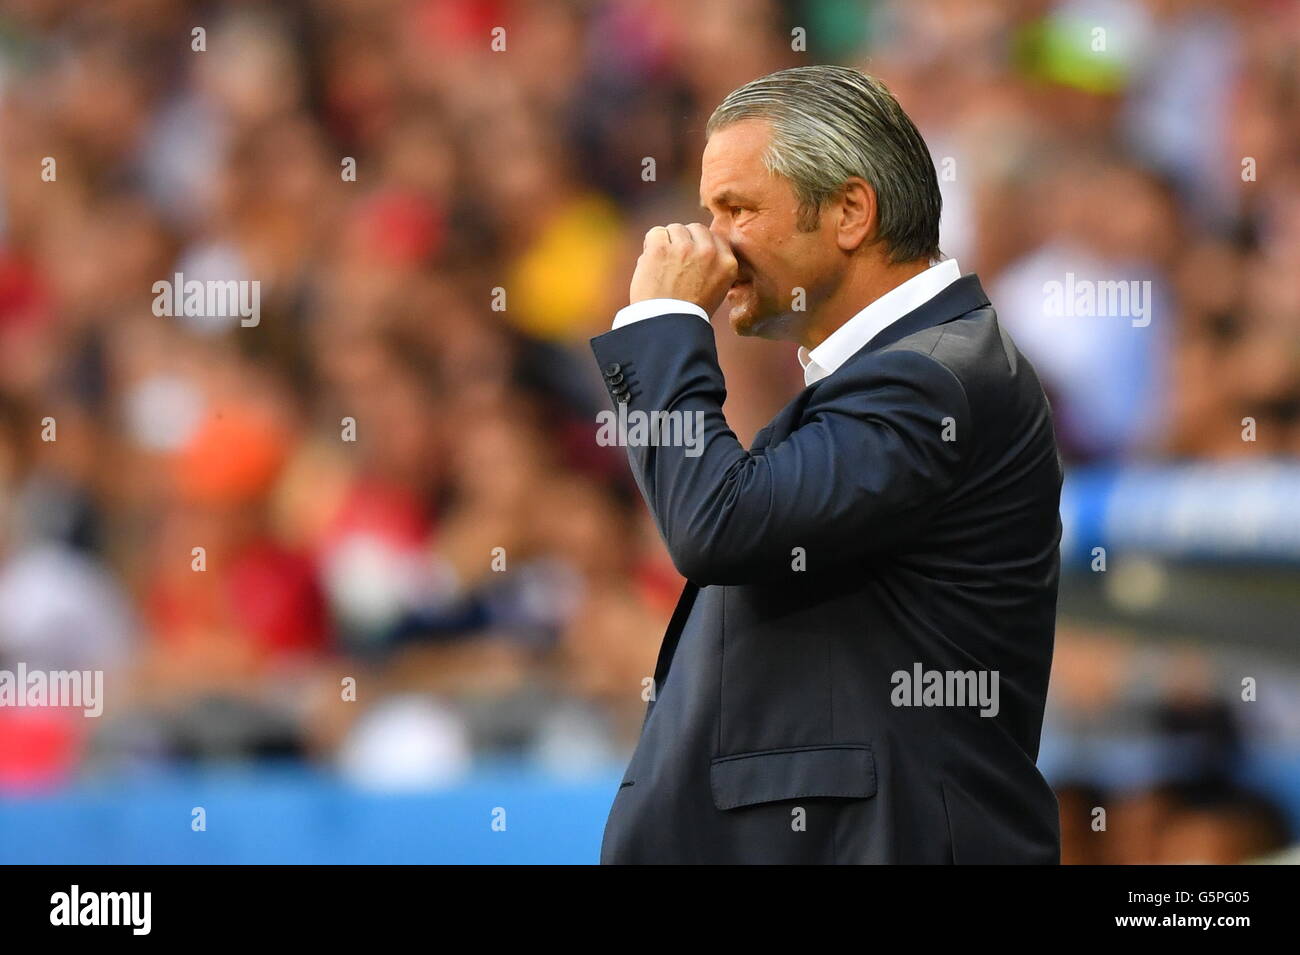 Lyon, France. 22nd June, 2016. Hungary's Bernd Storck gestures during the UEFA Euro 2016 Group F soccer match between Hungary and Portugal at the Stade de Lyon in Lyon, France, 22 June 2016. Photo: Uwe Anspach/dpa/Alamy Live News Stock Photo